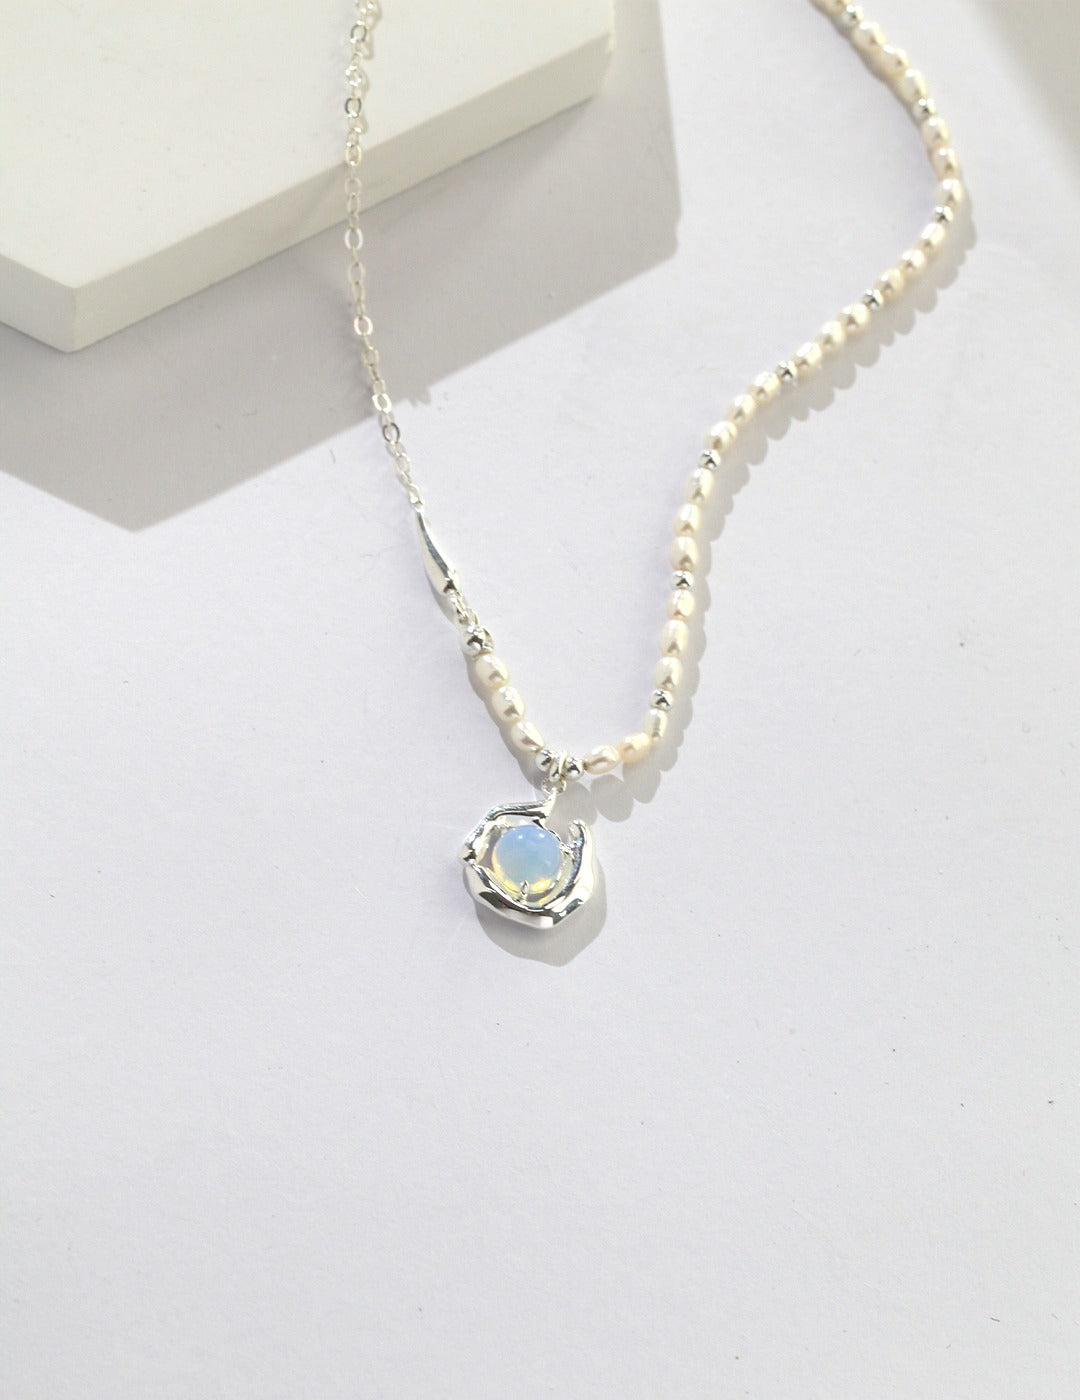 Elegant S925 Silver Labradorite and Pearl Necklace with Flowing Mountainous Design